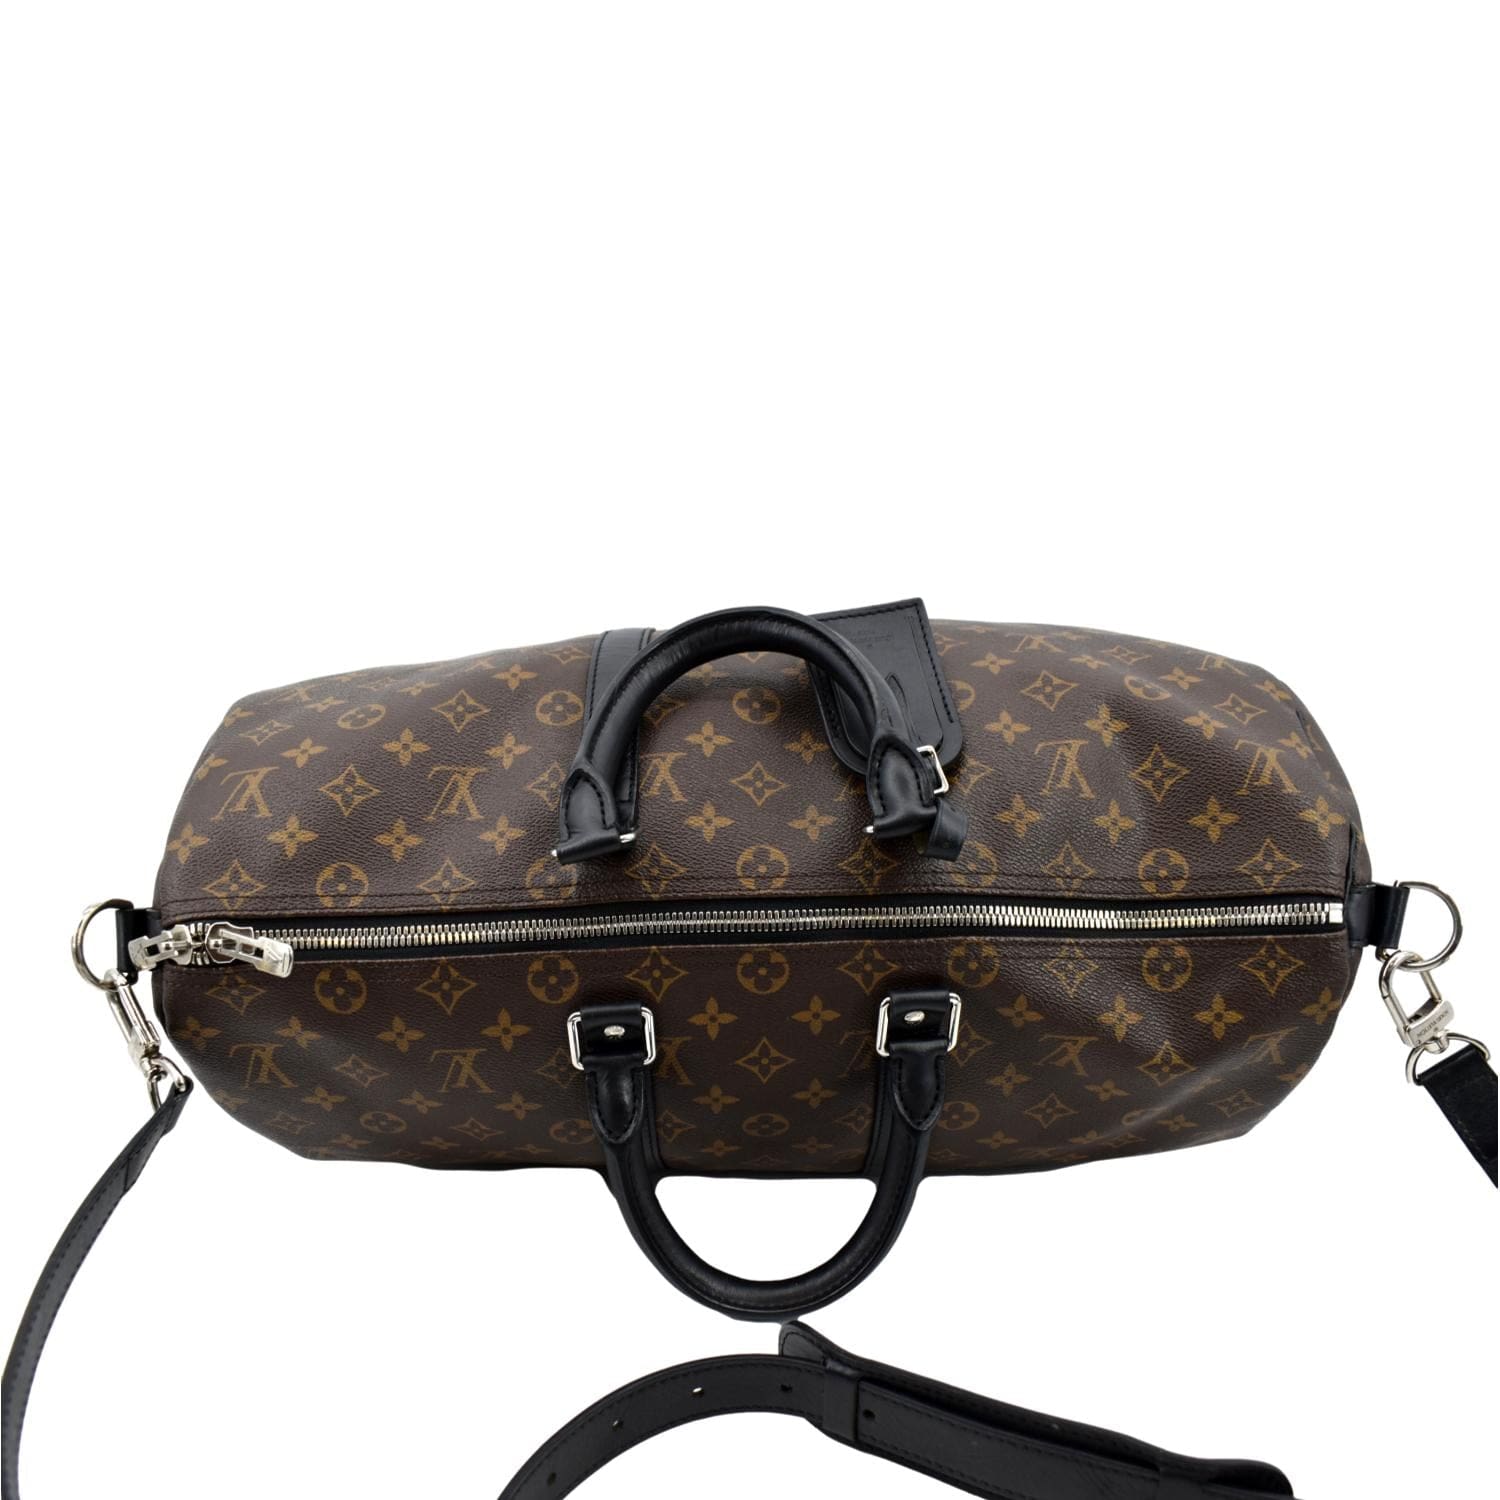 Louis Vuitton Keepall Bandouliere 45 Monogram Macassar without Luggage Tag  - SOLD